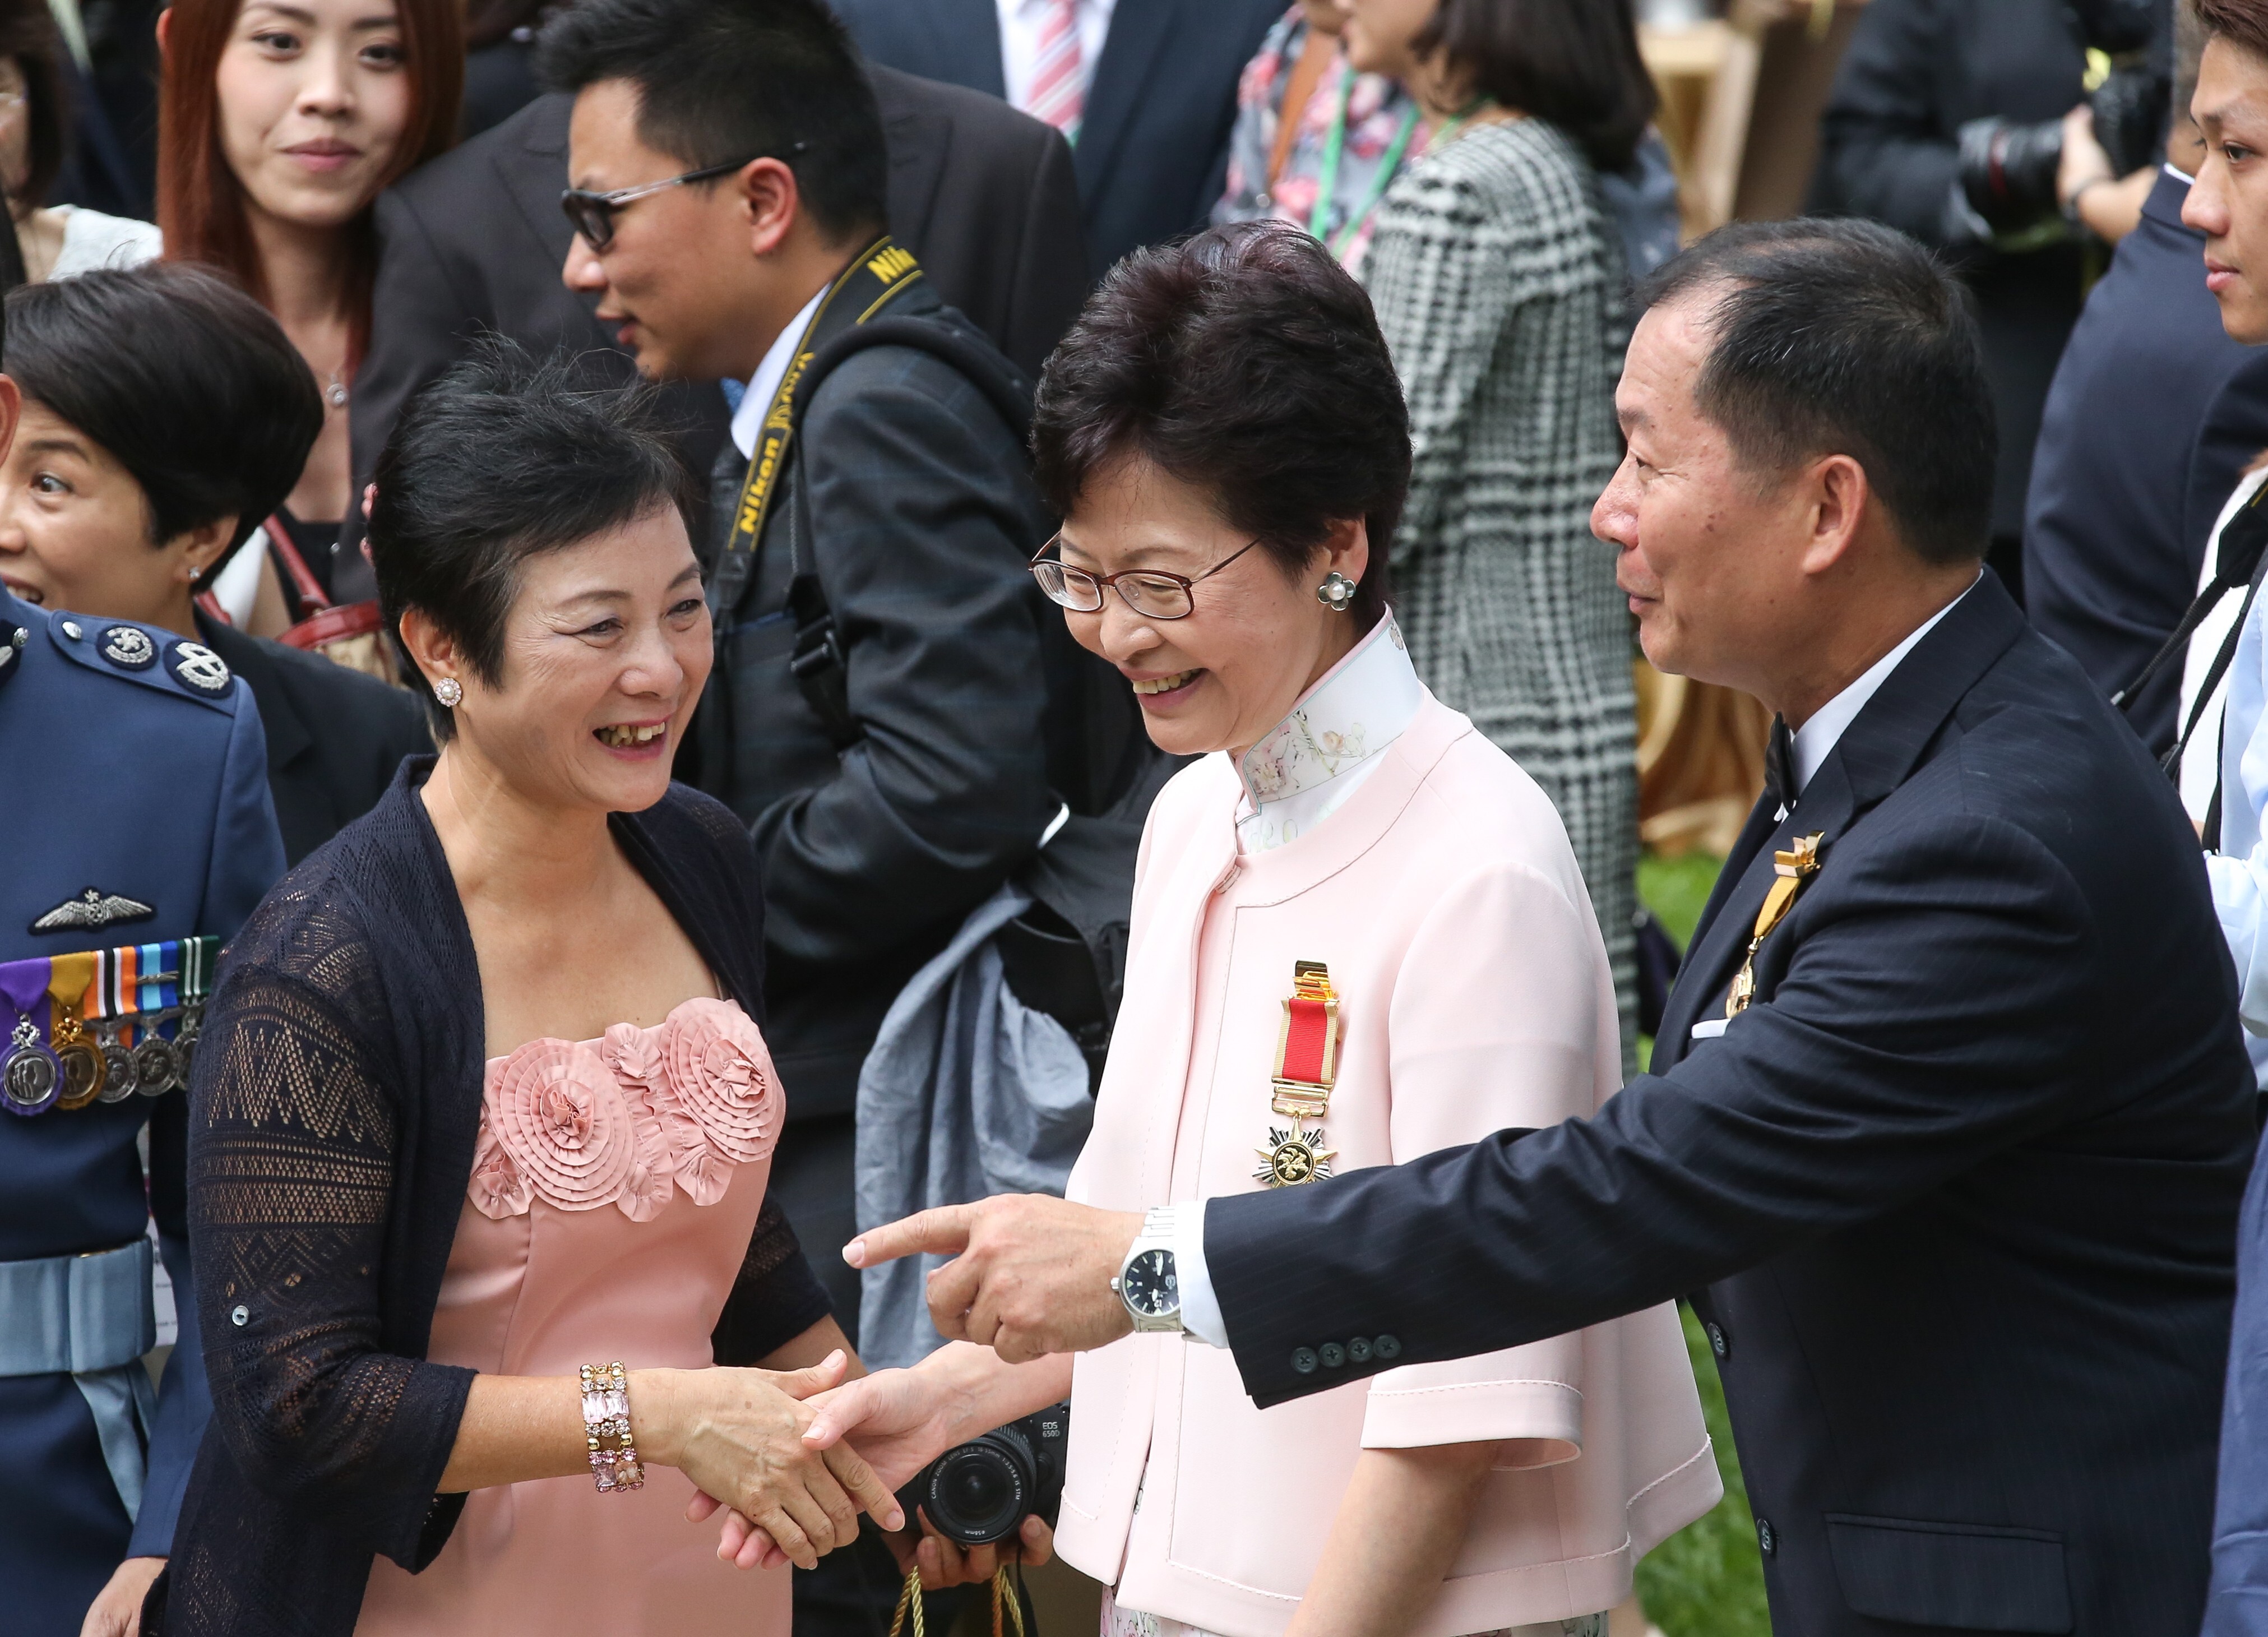 Chief Executive Carrie Lam was herself awarded the Grand Bauhinia Medal in 2016, when she was chief secretary. Photo: Edward Wong